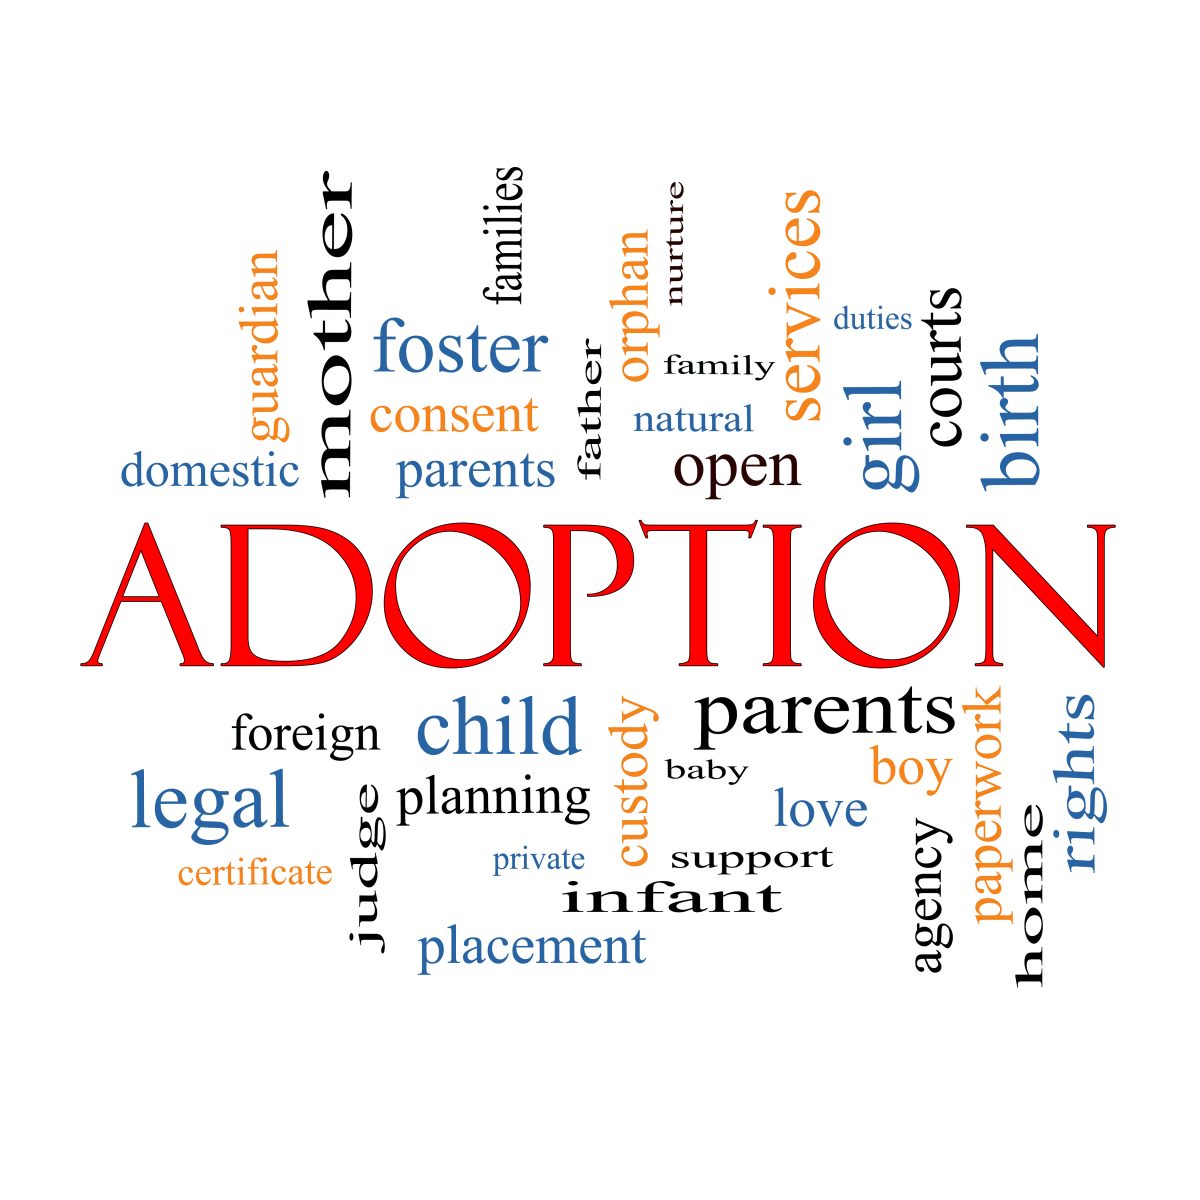 WHO IS THE BEST ADOPTION AGENCY OR ADOPTION ATTORNEY IN INDIANA?